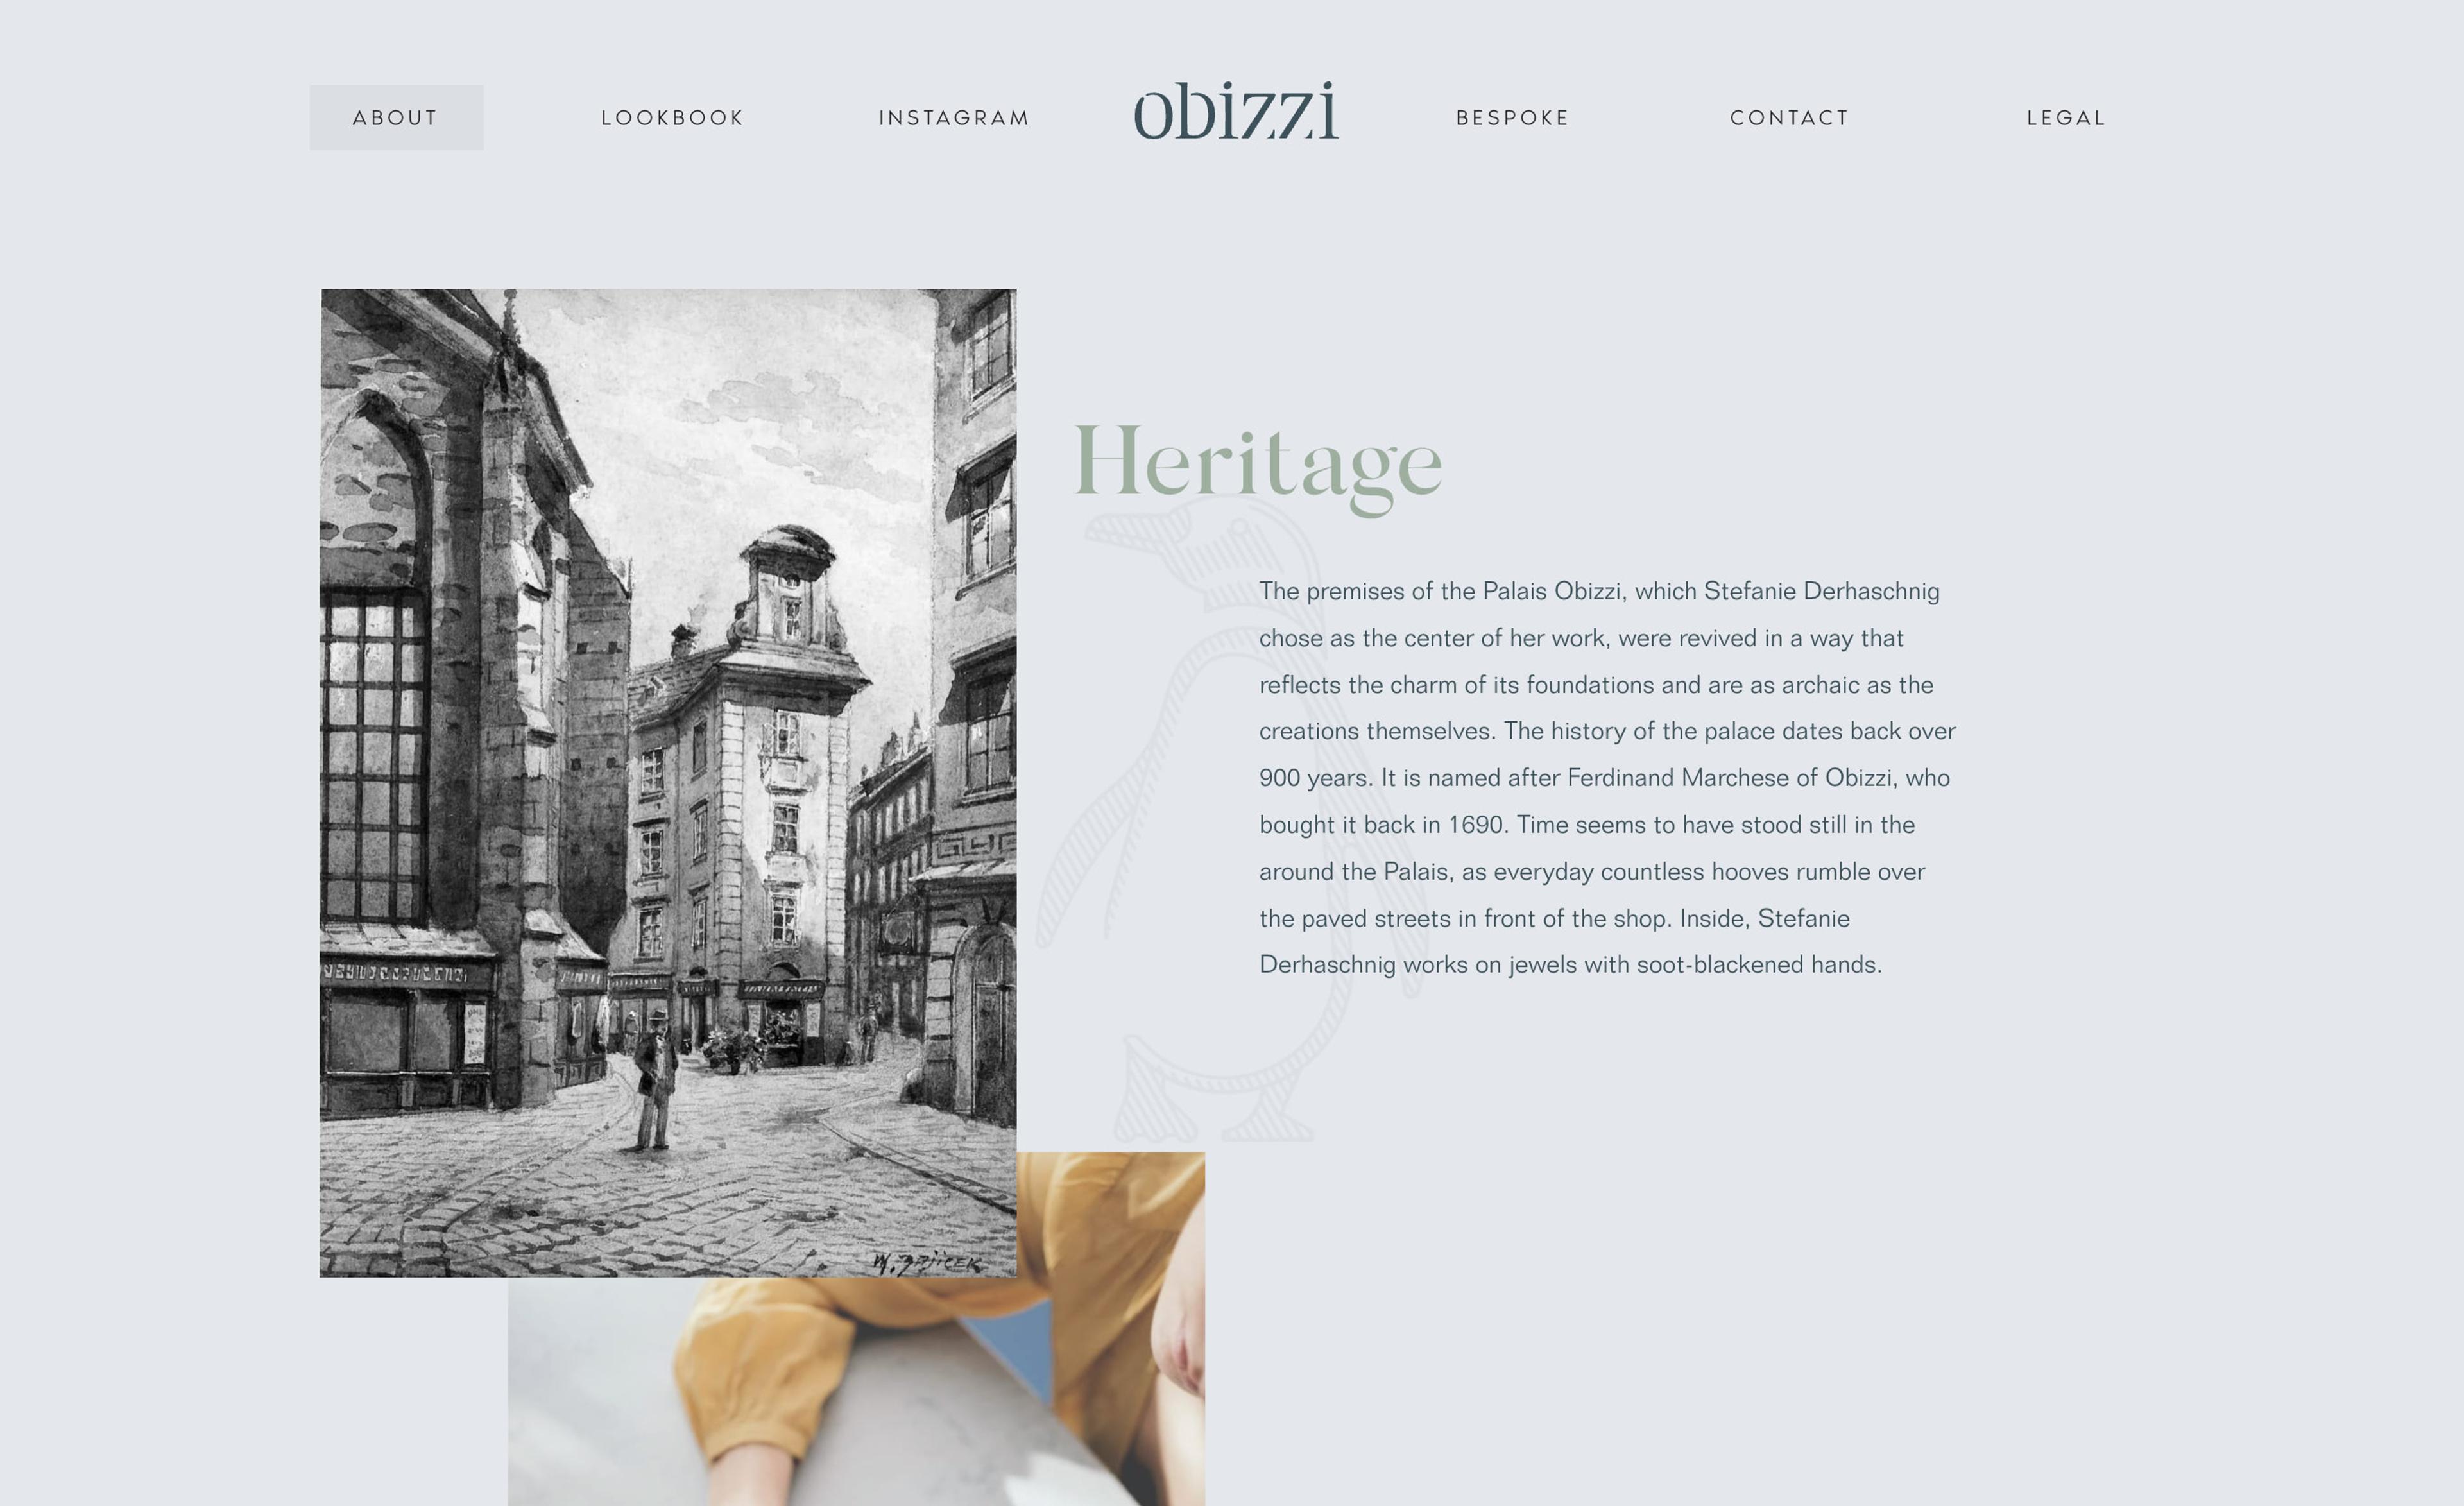 "Landing page for Obizzi Goldsmithery in Vienna, showing a historic drawing of the building it is located in."